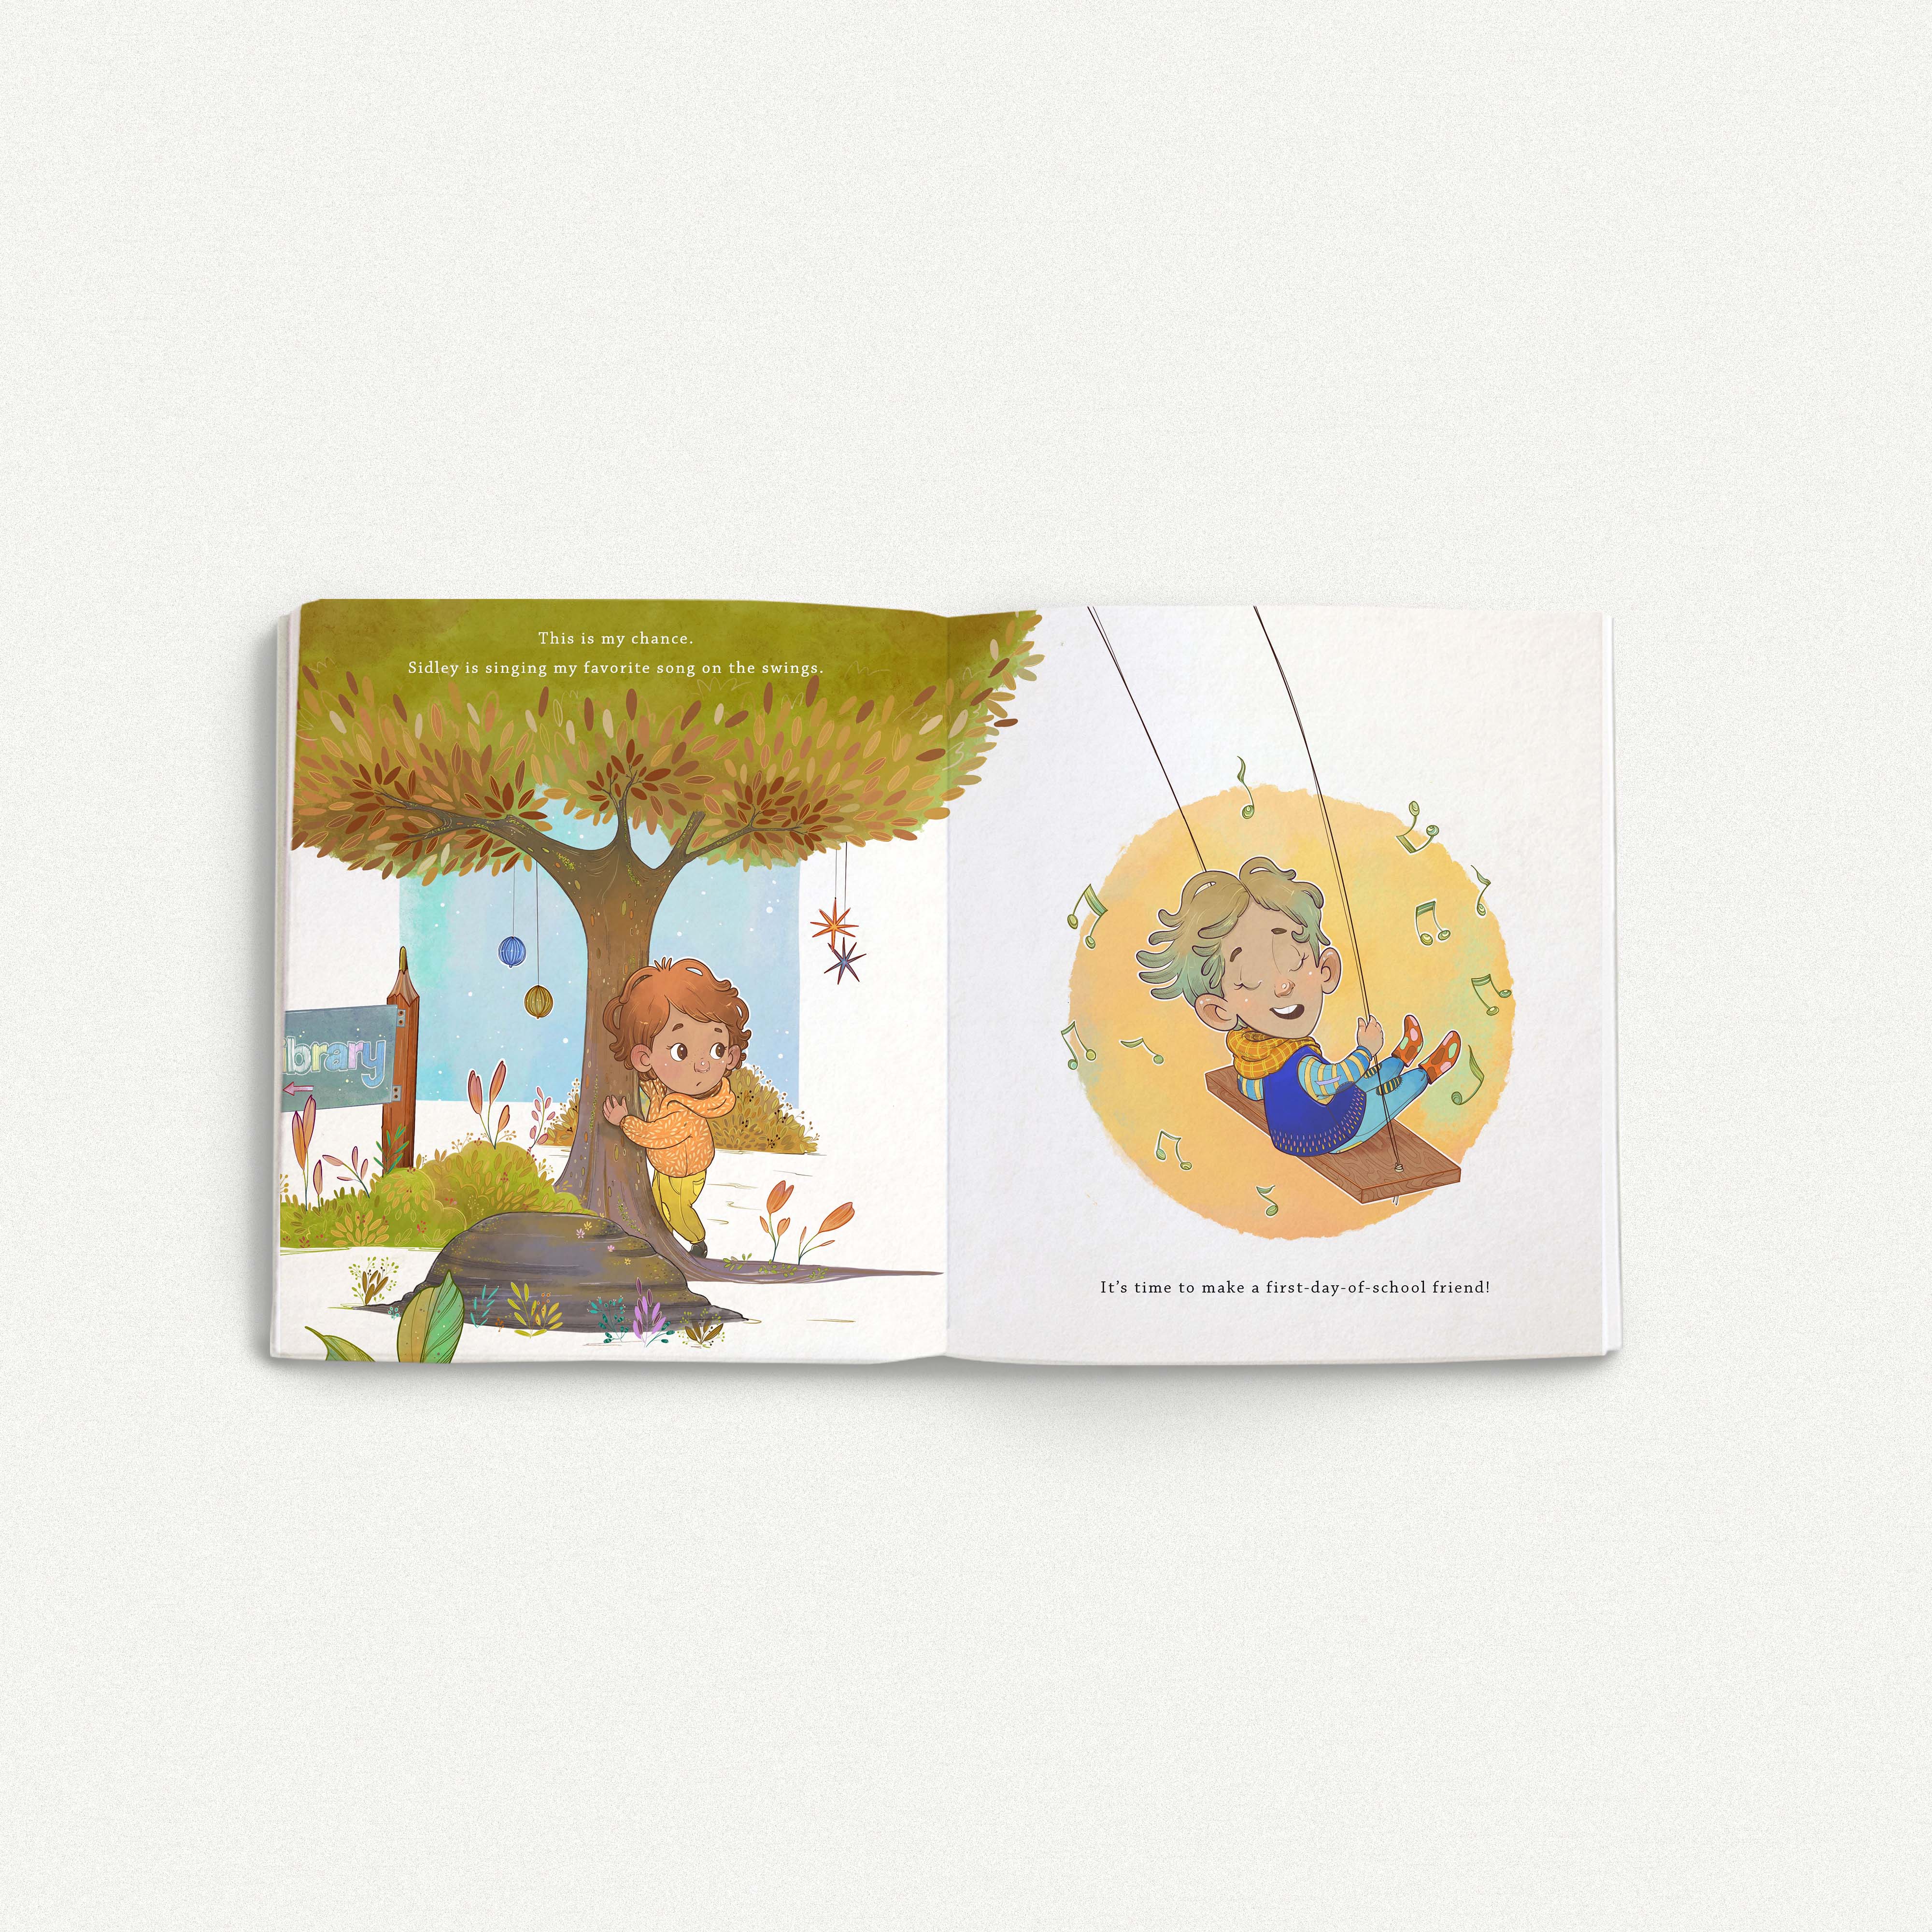 Book open showing a spread of Should I Say Hi? A child hides behind a tree looking at another child on a swing. Text reads. This is it. Sidley is singing my favorite song on the swings. It's time to make a first day of school friend.